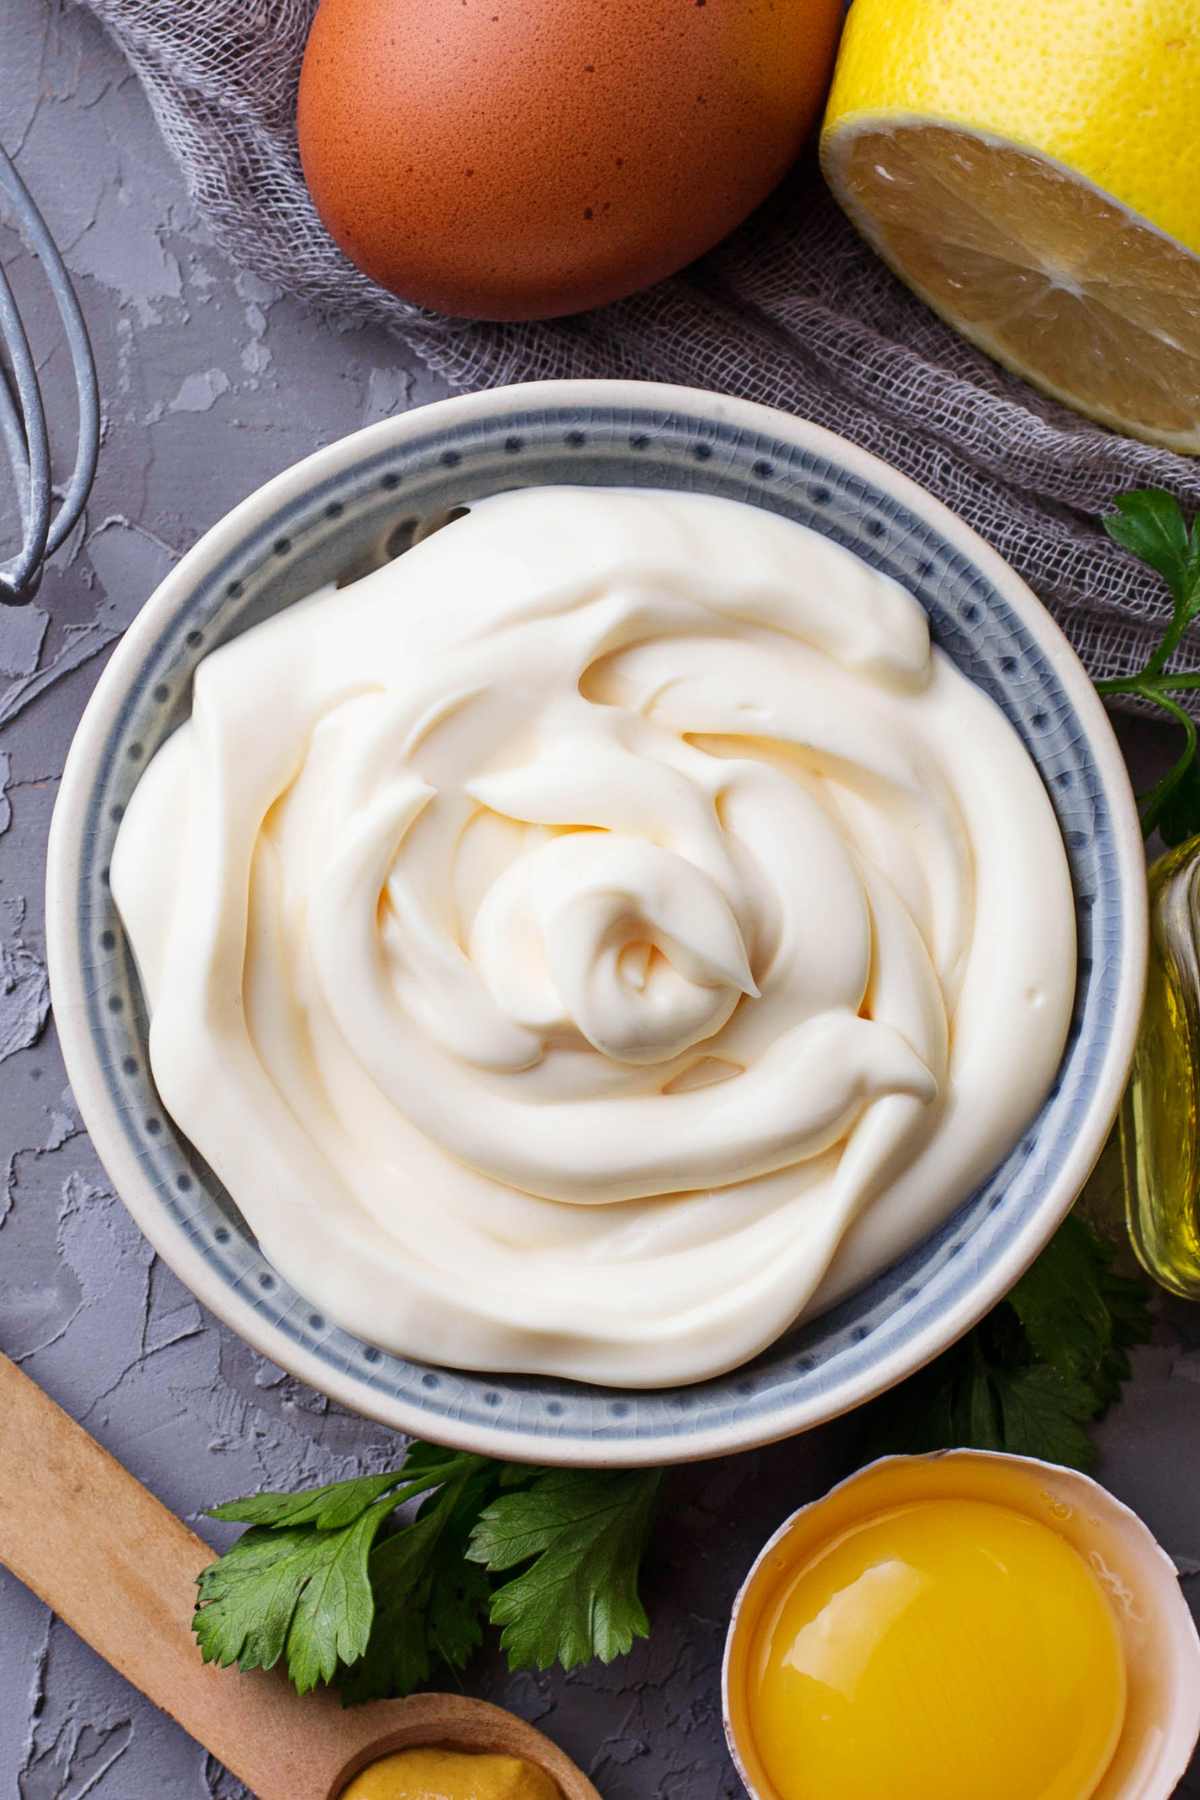 Is mayo keto? How many carbs are in mayonnaise? On a keto diet, we’d like to make sure the food we eat is keto-friendly, from meals to snacks to condiments. Read on to find out everything you need to know about mayo and whether or not you can continue to enjoy it on your keto diet.